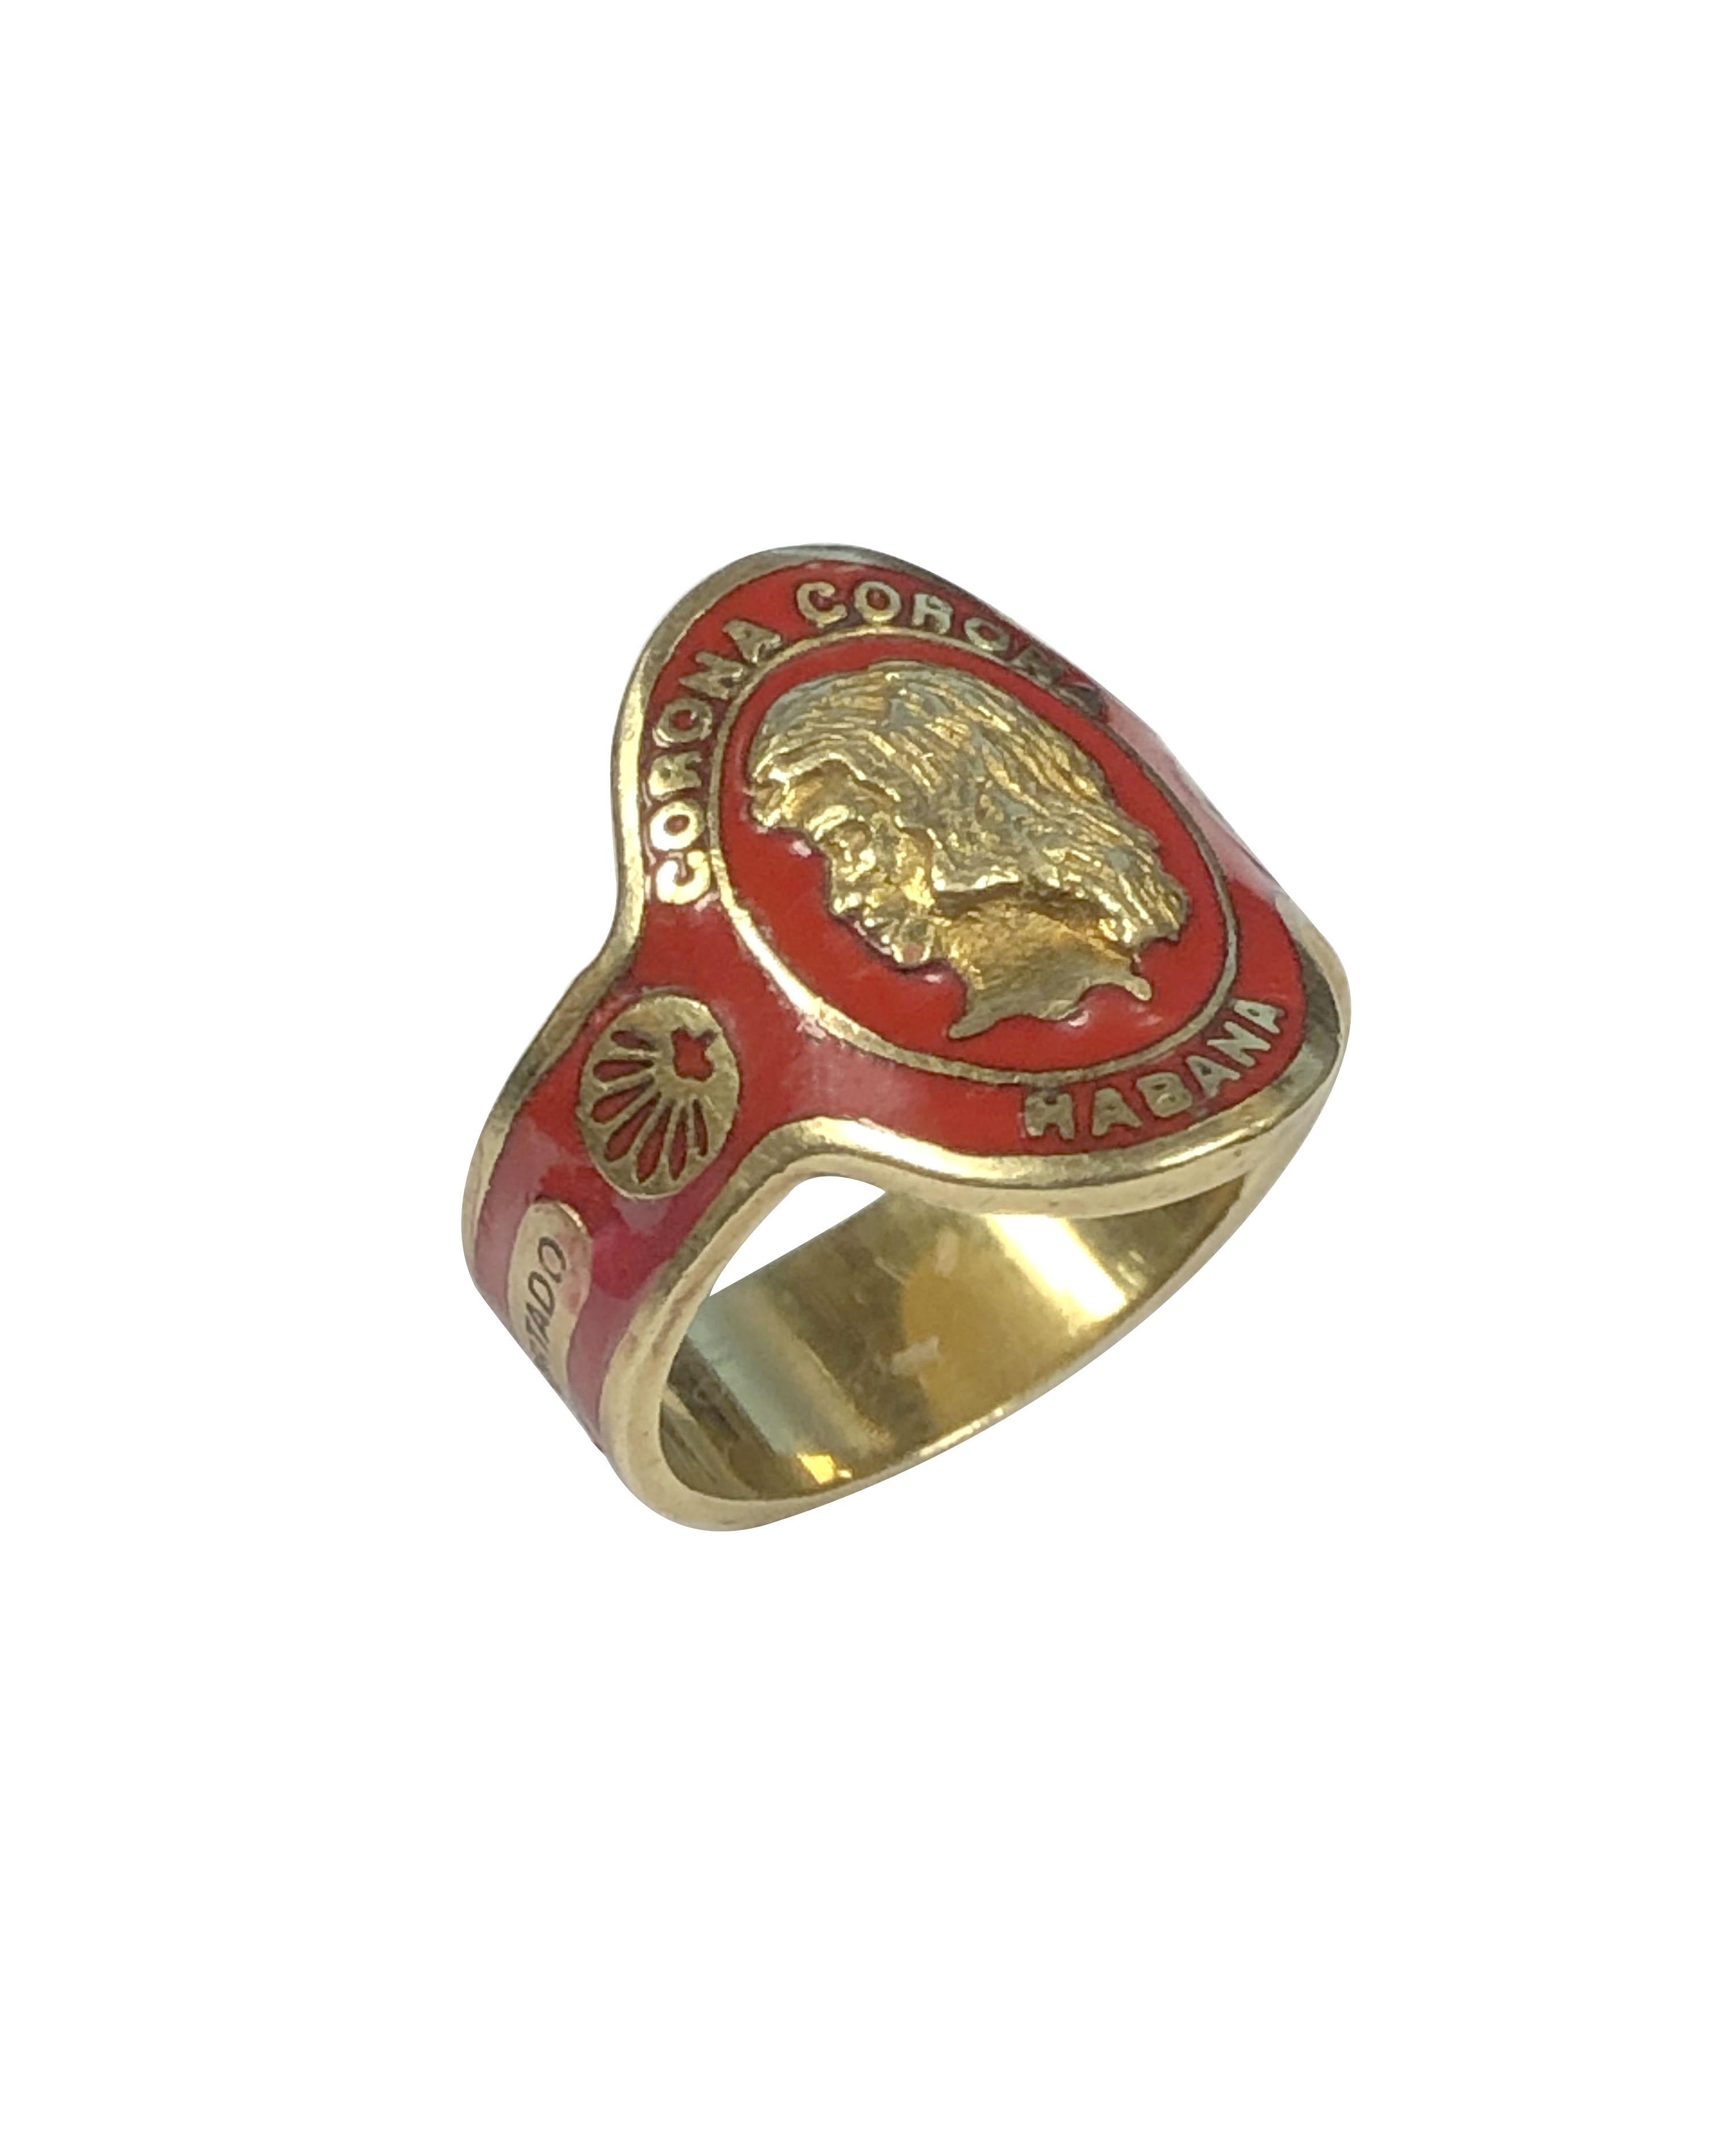 Circa 1960s Cartier Cigar Band Ring, 18k Yellow Gold with Red Enamel. The top of the ring measures 1/2 X 5/8 inch, finger size 5. Signed and numbered and comes in the original Cartier presentation box. 